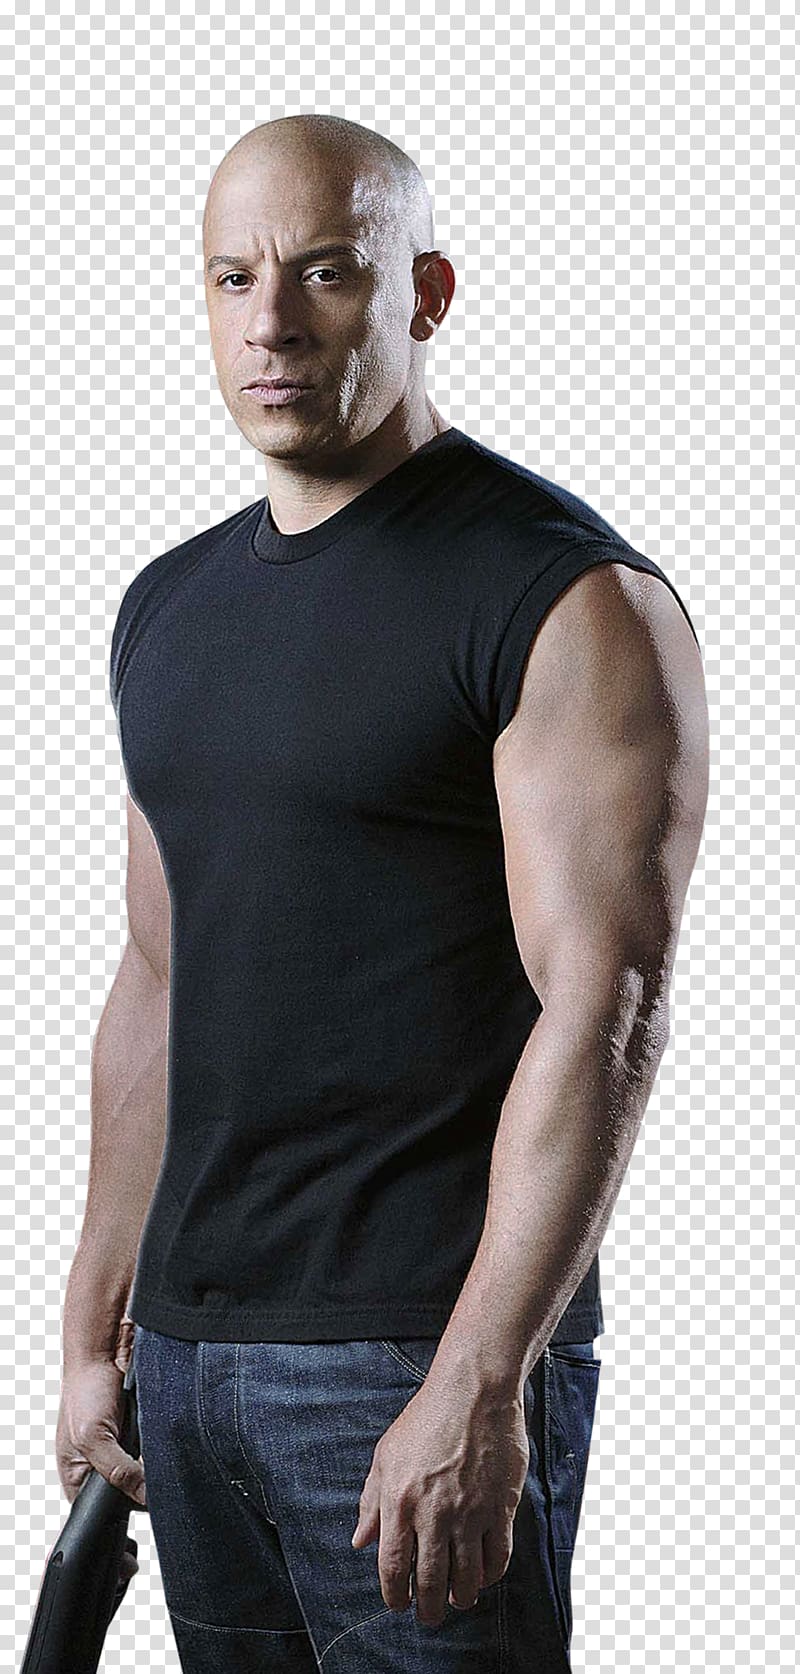 Vin Diesel The Fast and the Furious Dominic Toretto Luke Hobbs, vin diesel transparent background PNG clipart